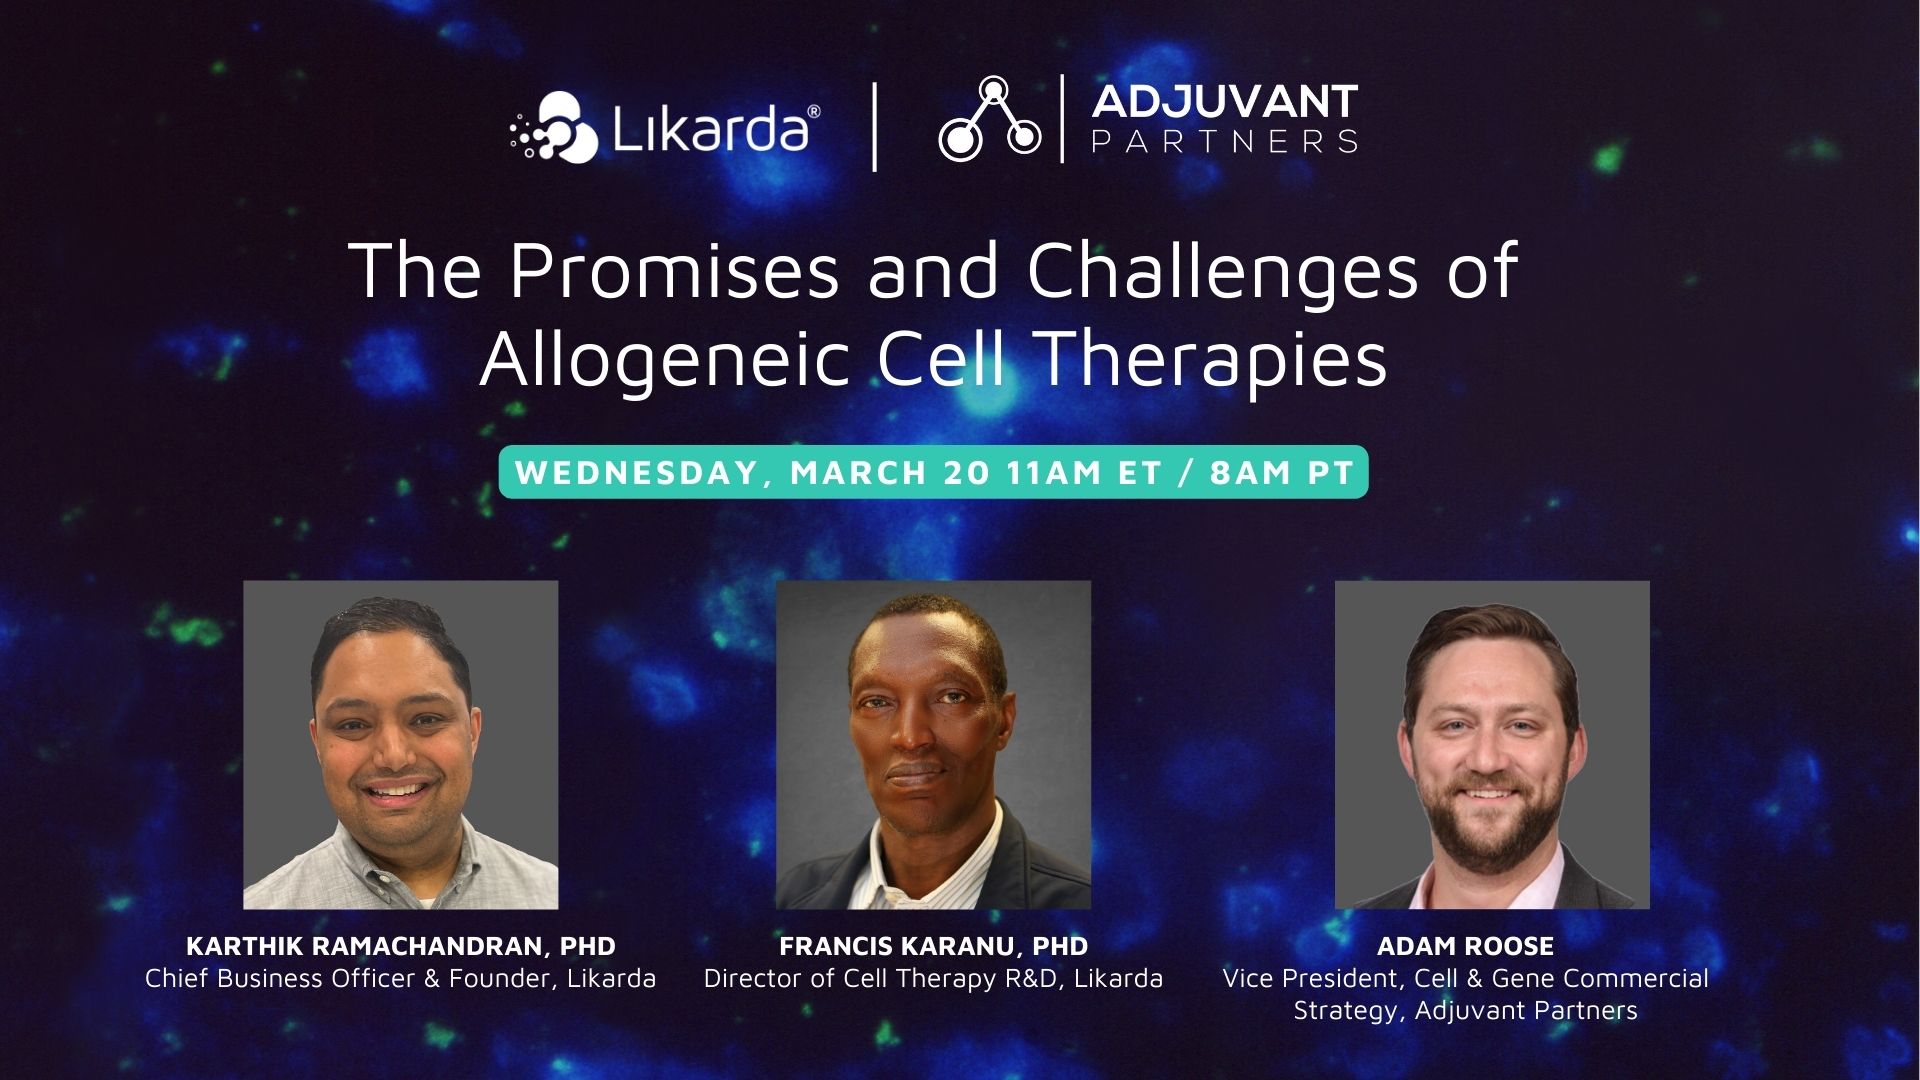 Likarda Konect 3 - The Promises and Challenges of Allogeneic Cell Therapies